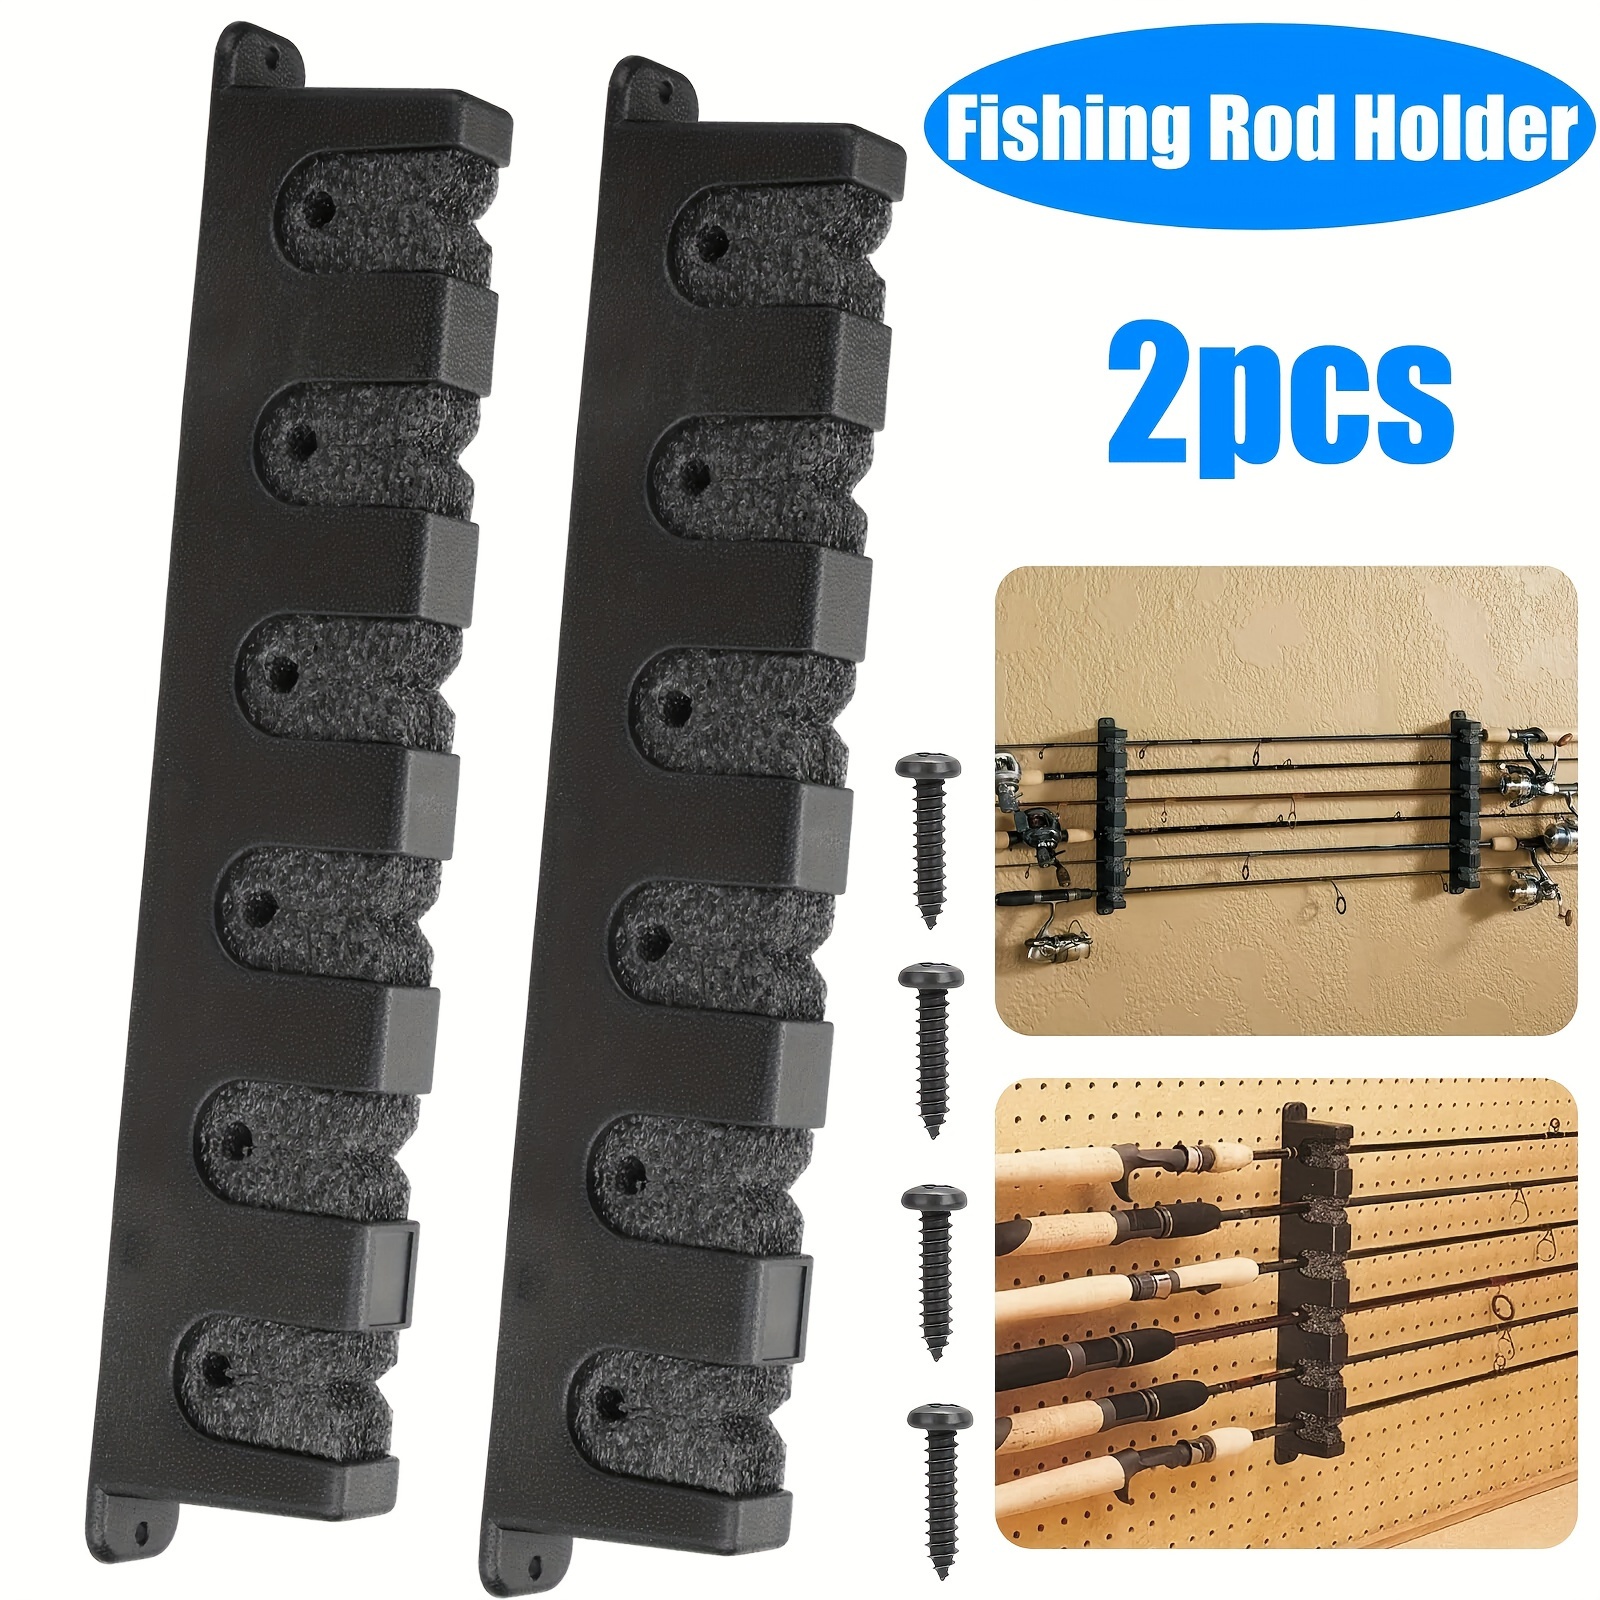 

2pcs Wall-mounted , Horizontal Pole Organizer, For 6 Rods, Space-saving Storage Rack For Fishing Gear